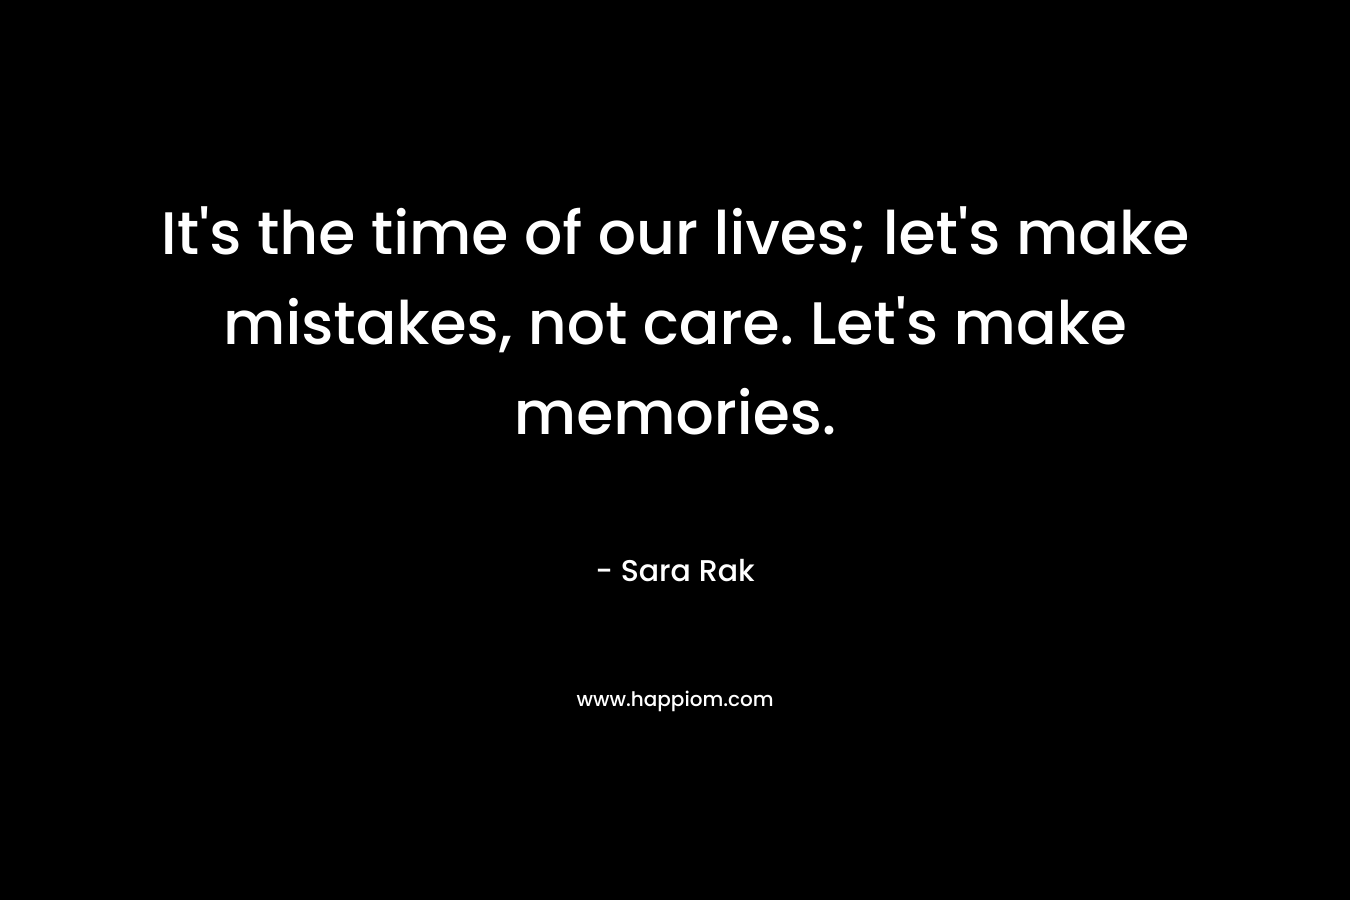 It's the time of our lives; let's make mistakes, not care. Let's make memories.